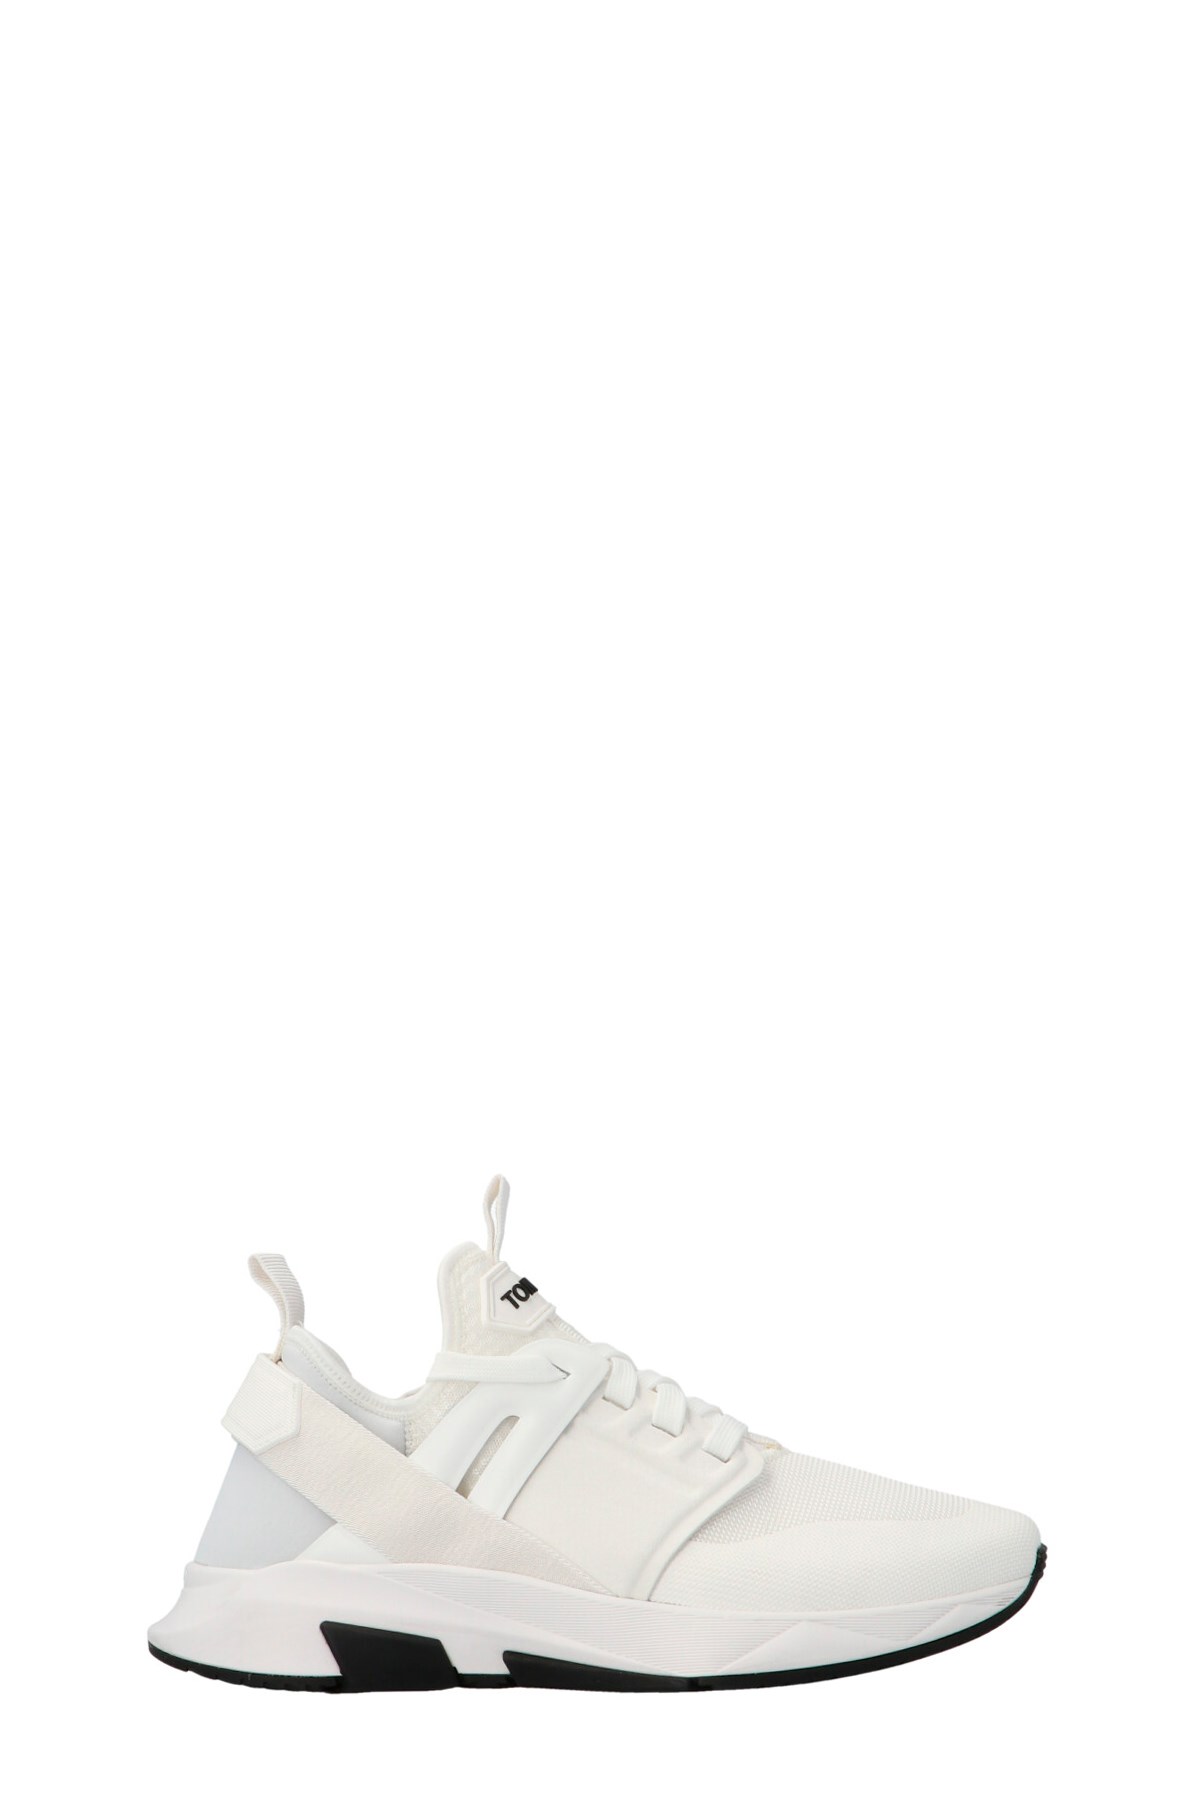 TOM FORD Low Top Sneakers